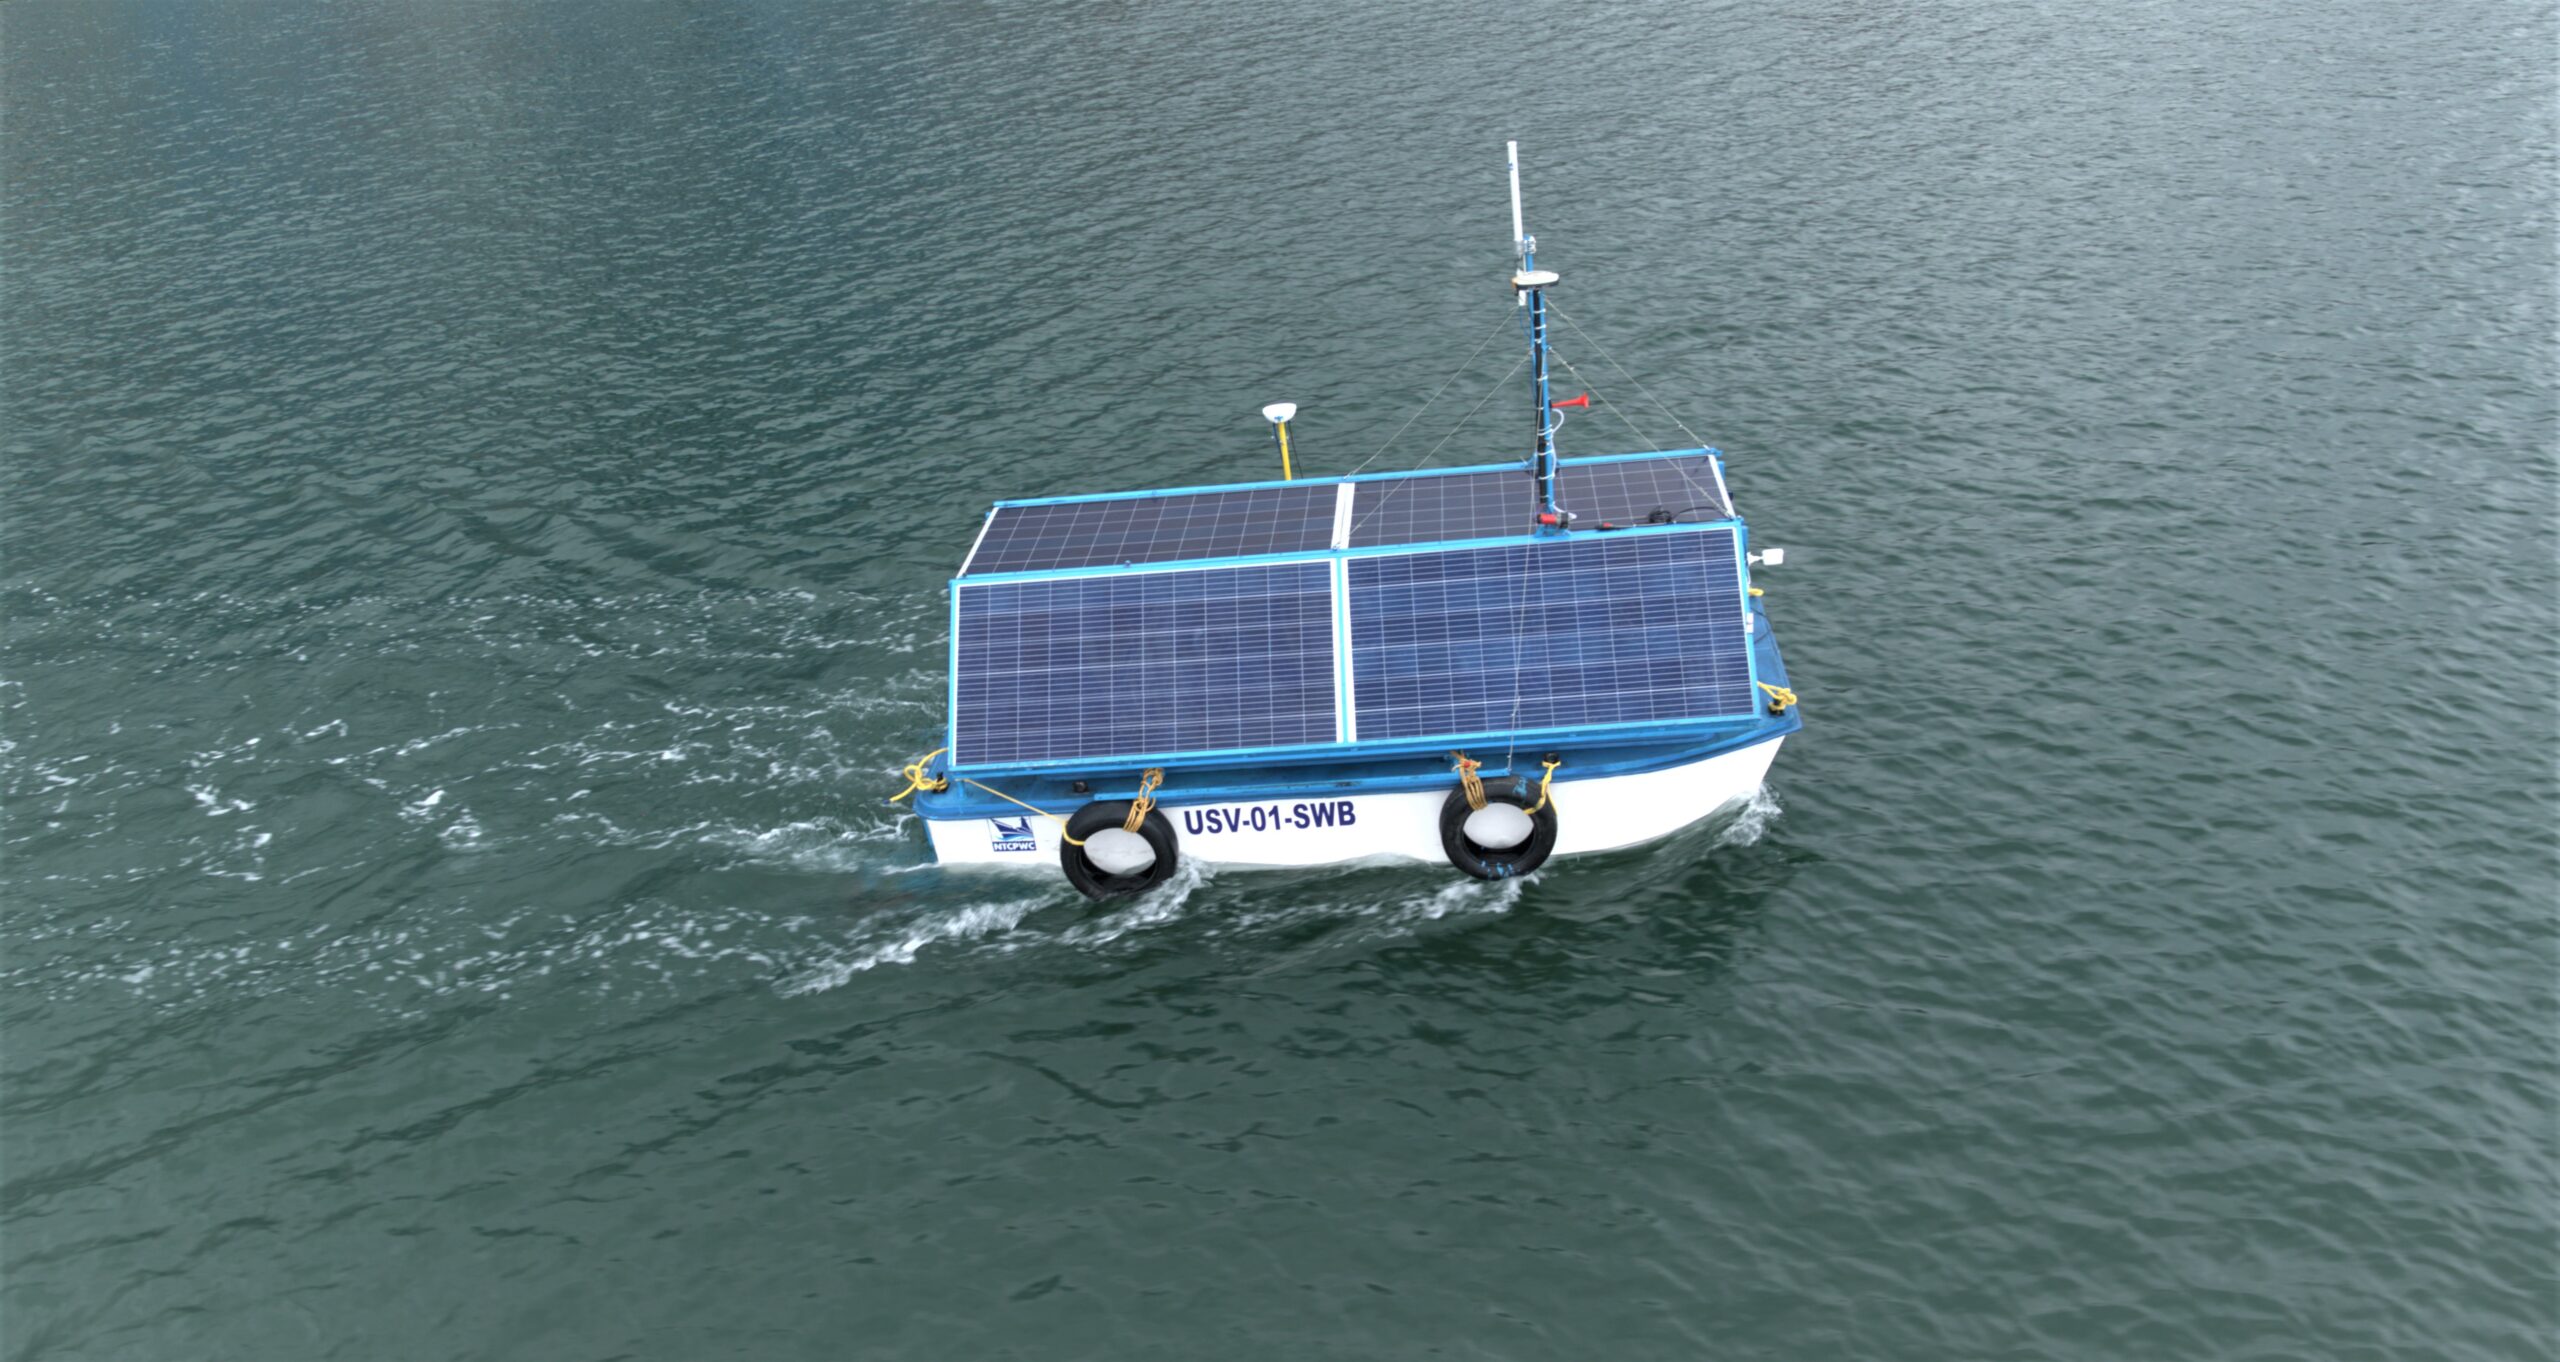 IIT Madras Researchers Develop Solar-powered Unmanned Autonomous Survey Craft for Indian Ports & Inland Waterways